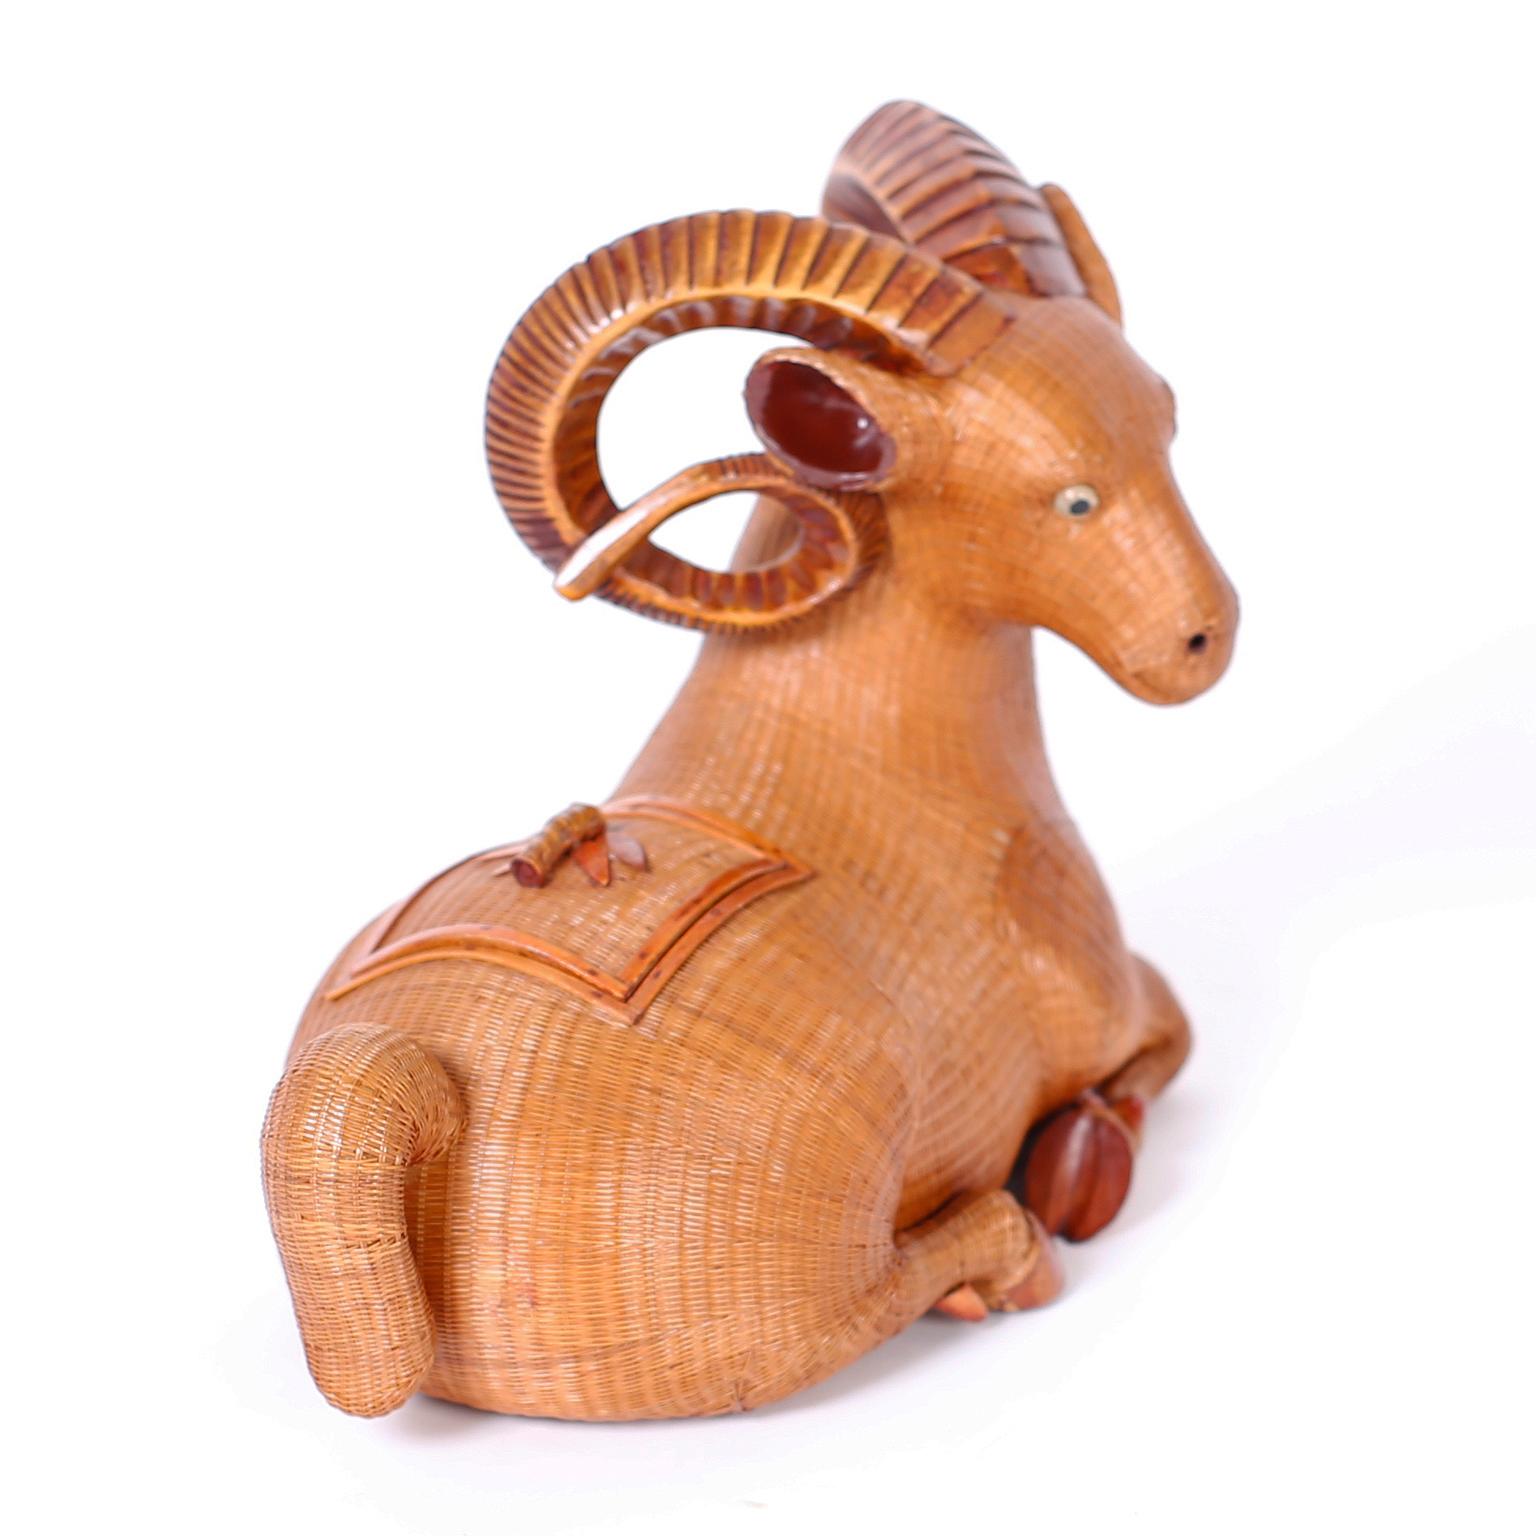 Chinese Ram in repose ambitiously woven with wicker from the noted Shanghai Collection featuring carved wood horns, hooves, and dragon fly lid handle